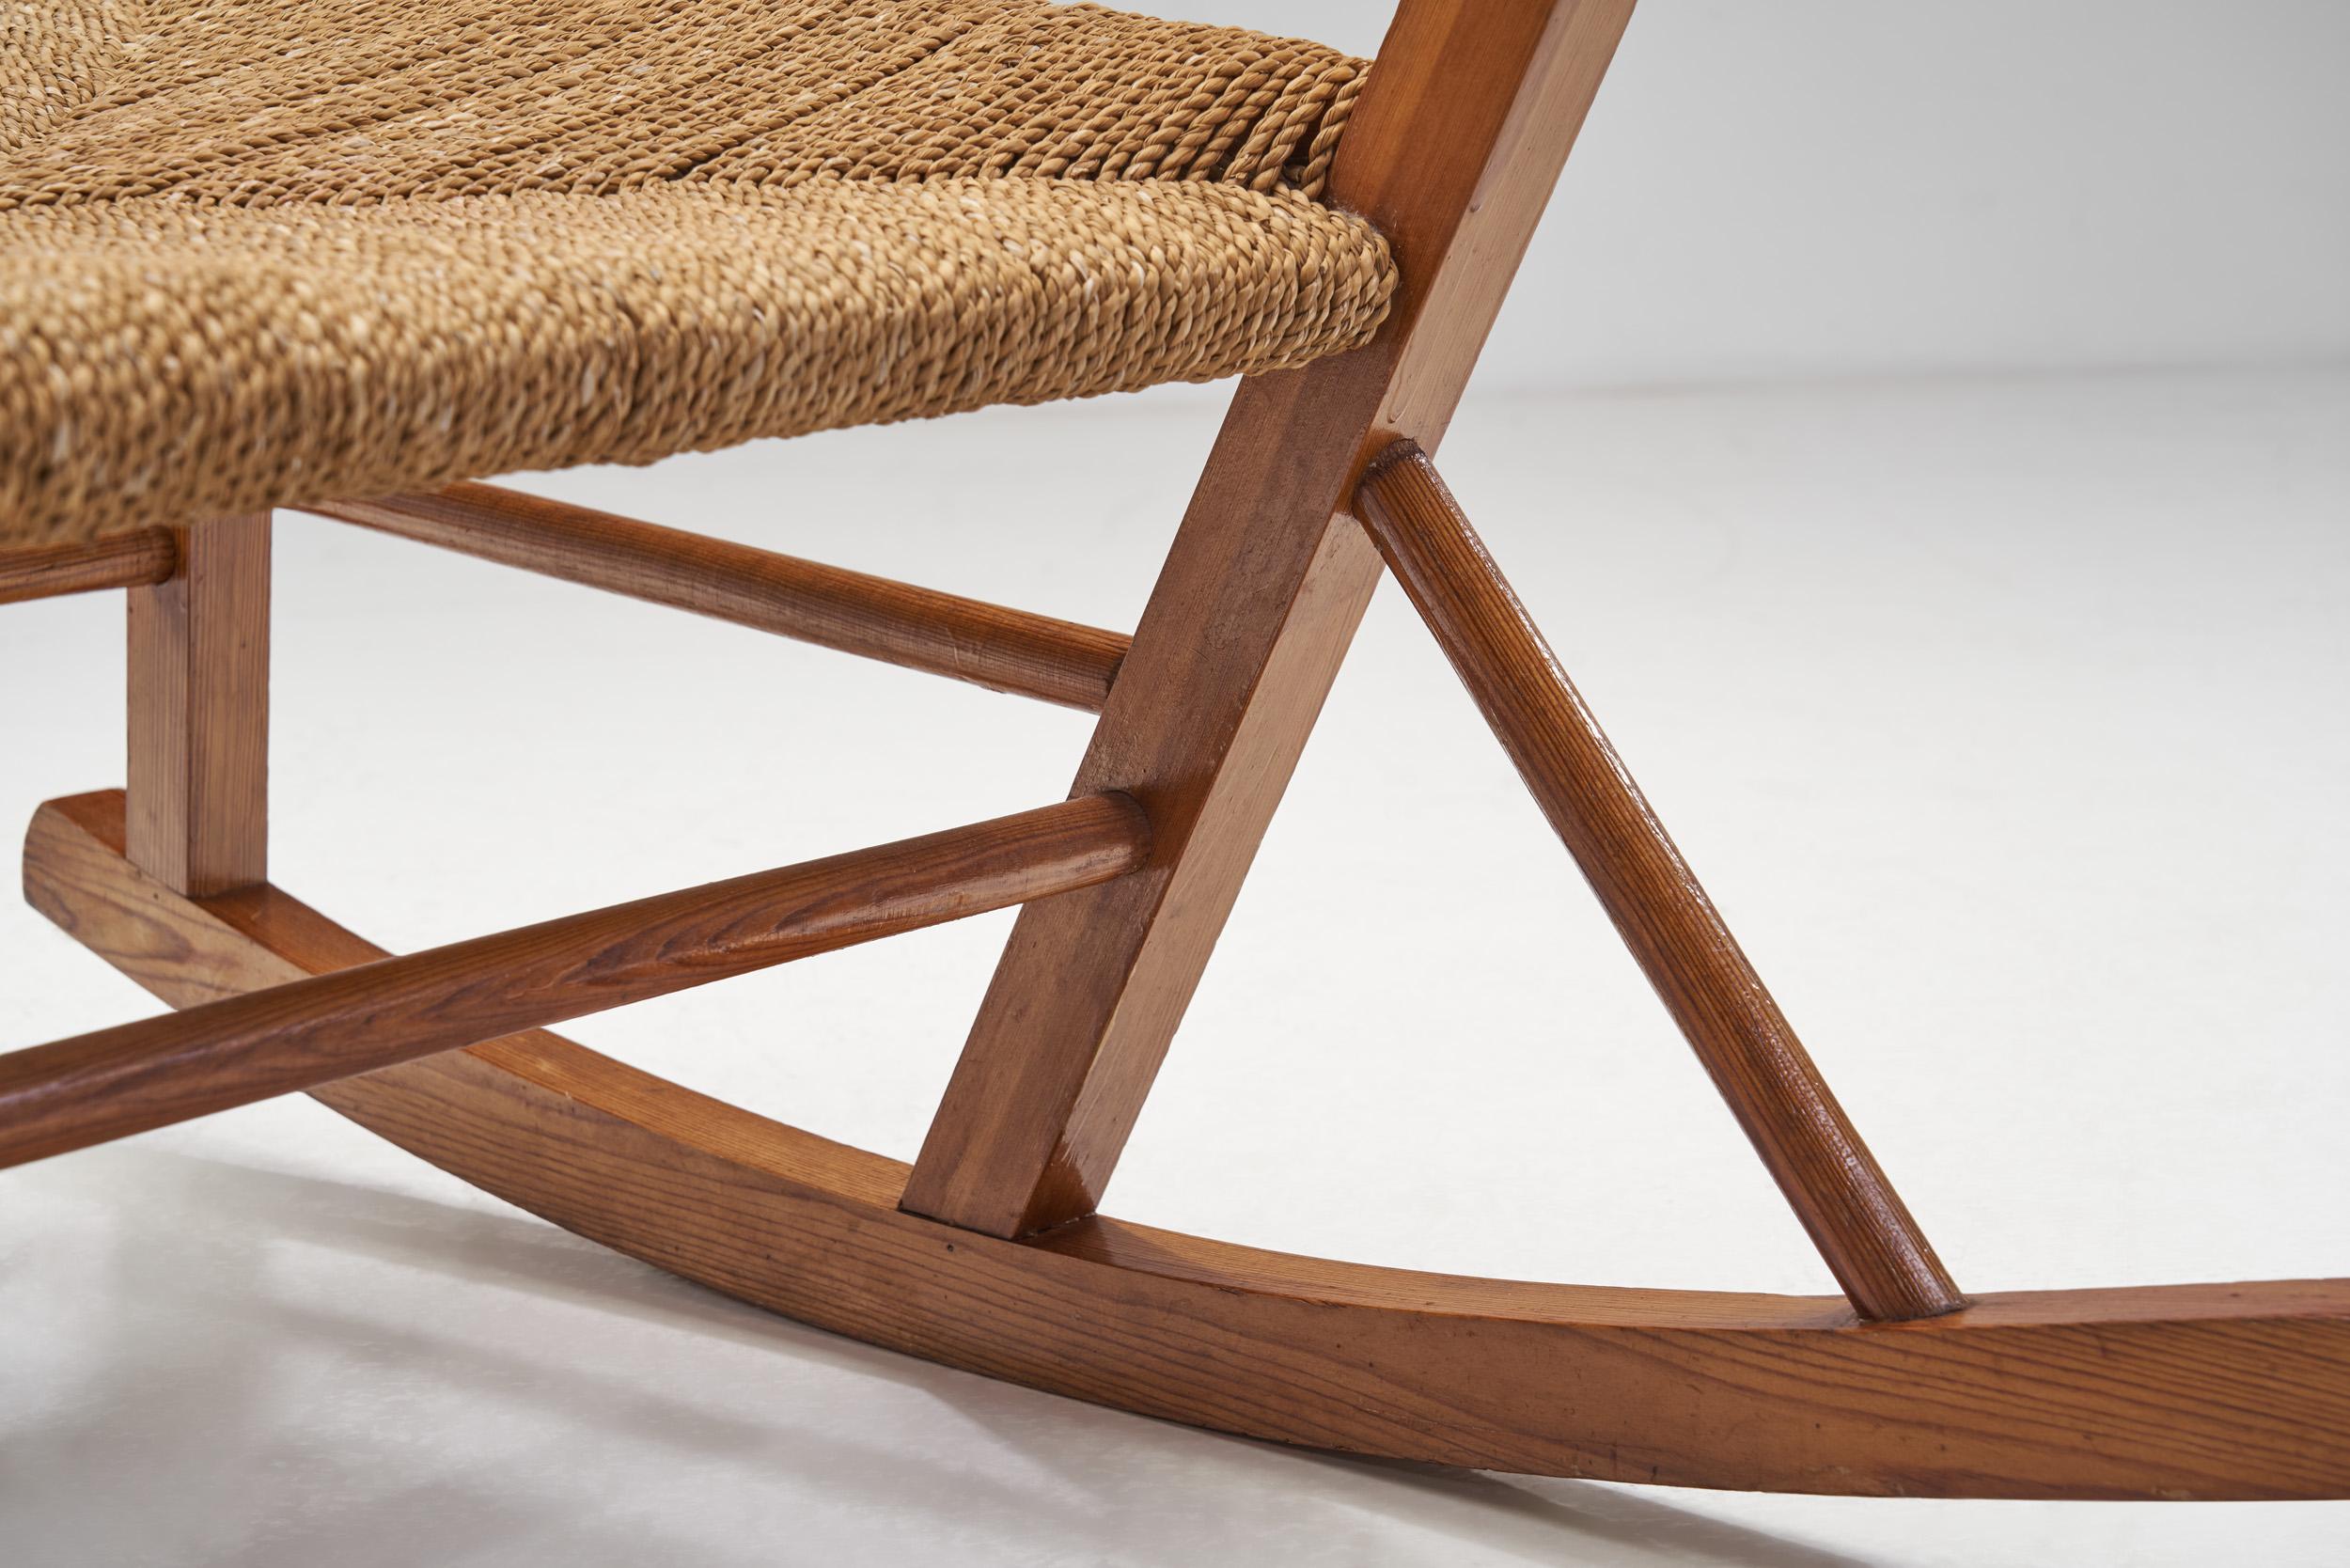 Norwegian Wood and Papercord Rocking Chair by Slåke Møbelfabrik, Norway 1940s For Sale 9